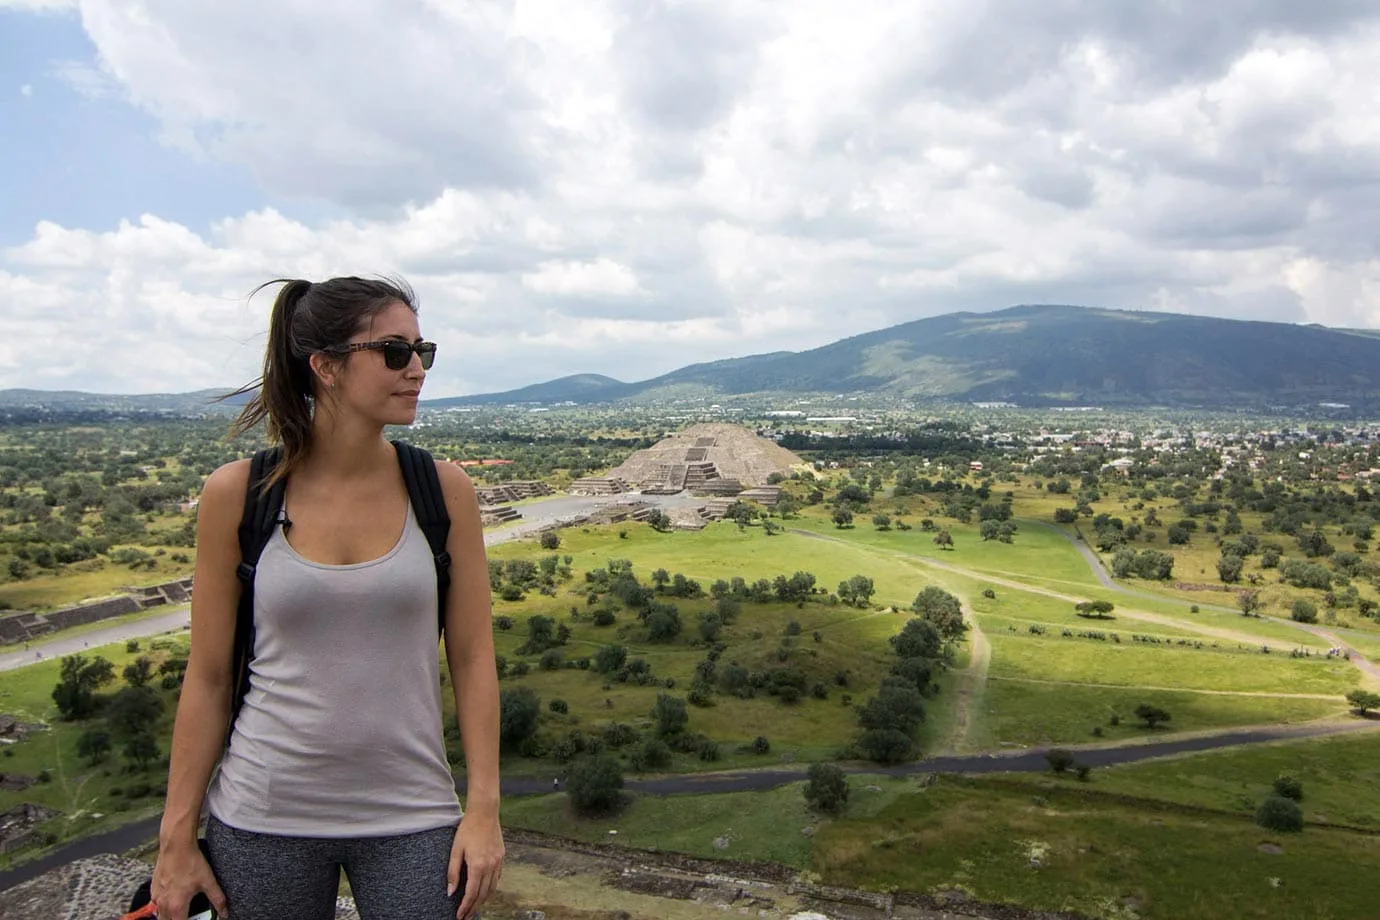 Once at the top of the Pyramid of the Sun you are presented with the most magnificent views of the once ancient city